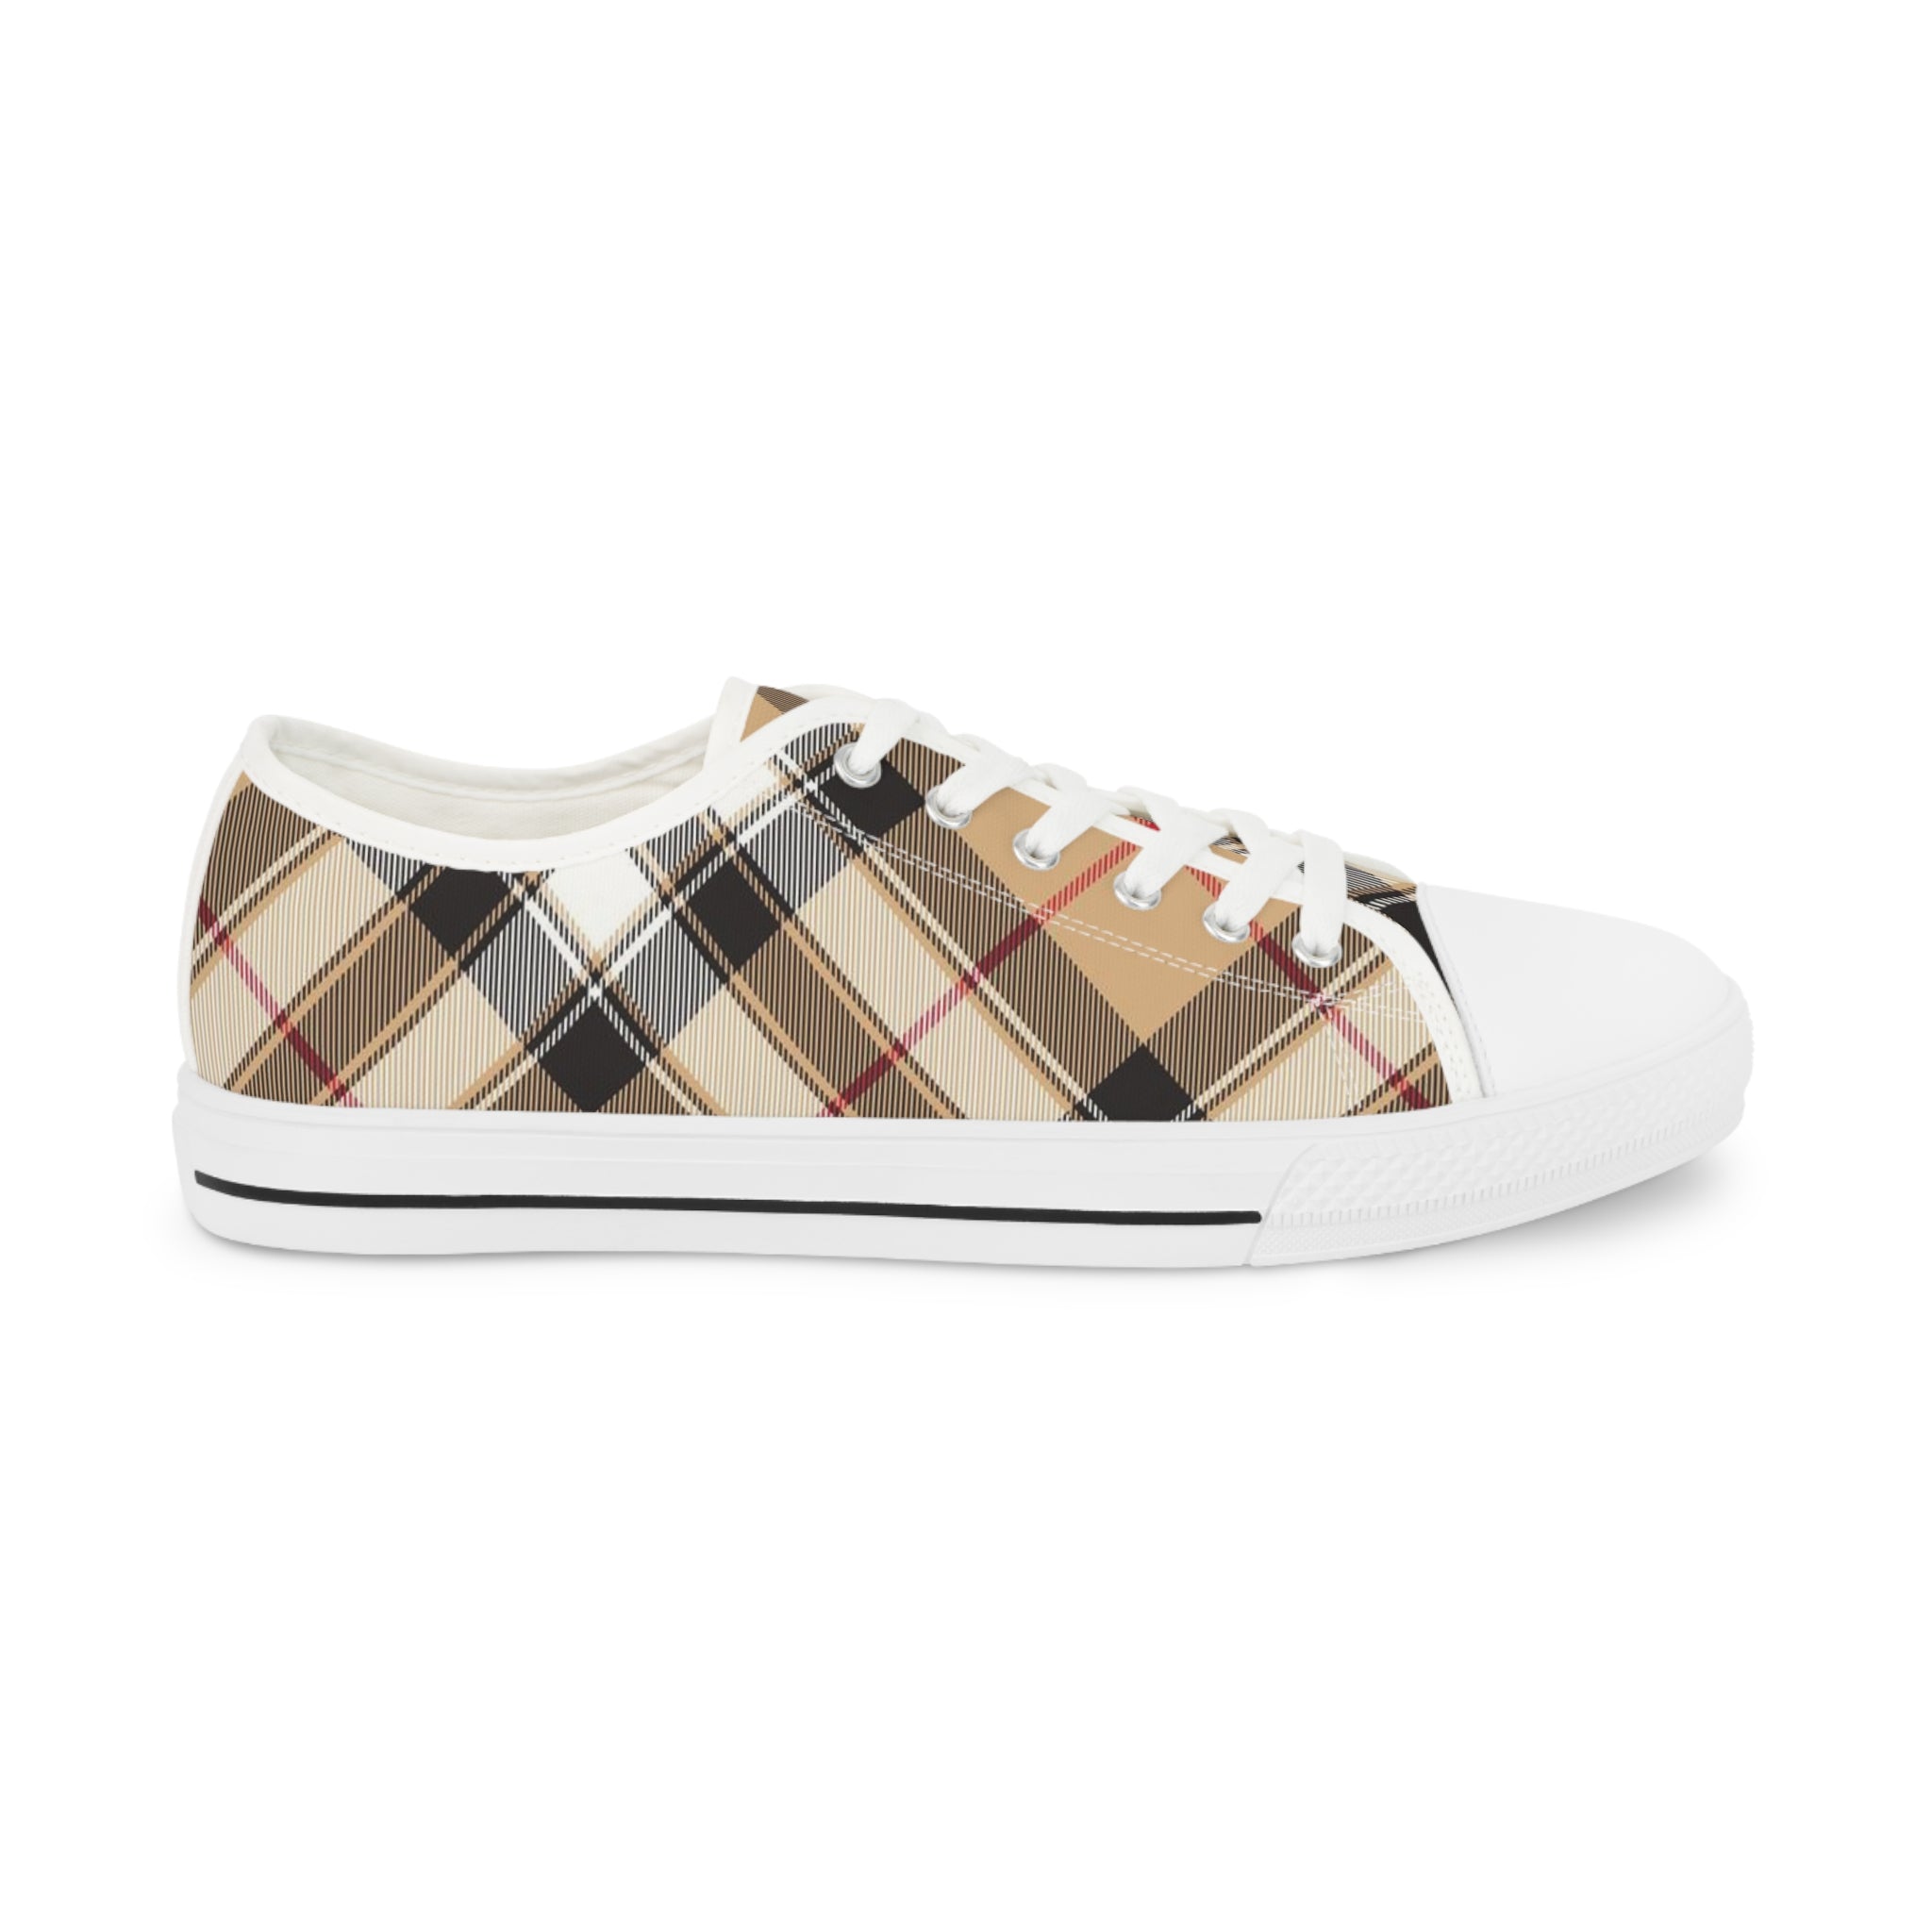 Groove Fashion Collection in Plaid (Red Stripe) Large Print Men's Low Top Sneakers